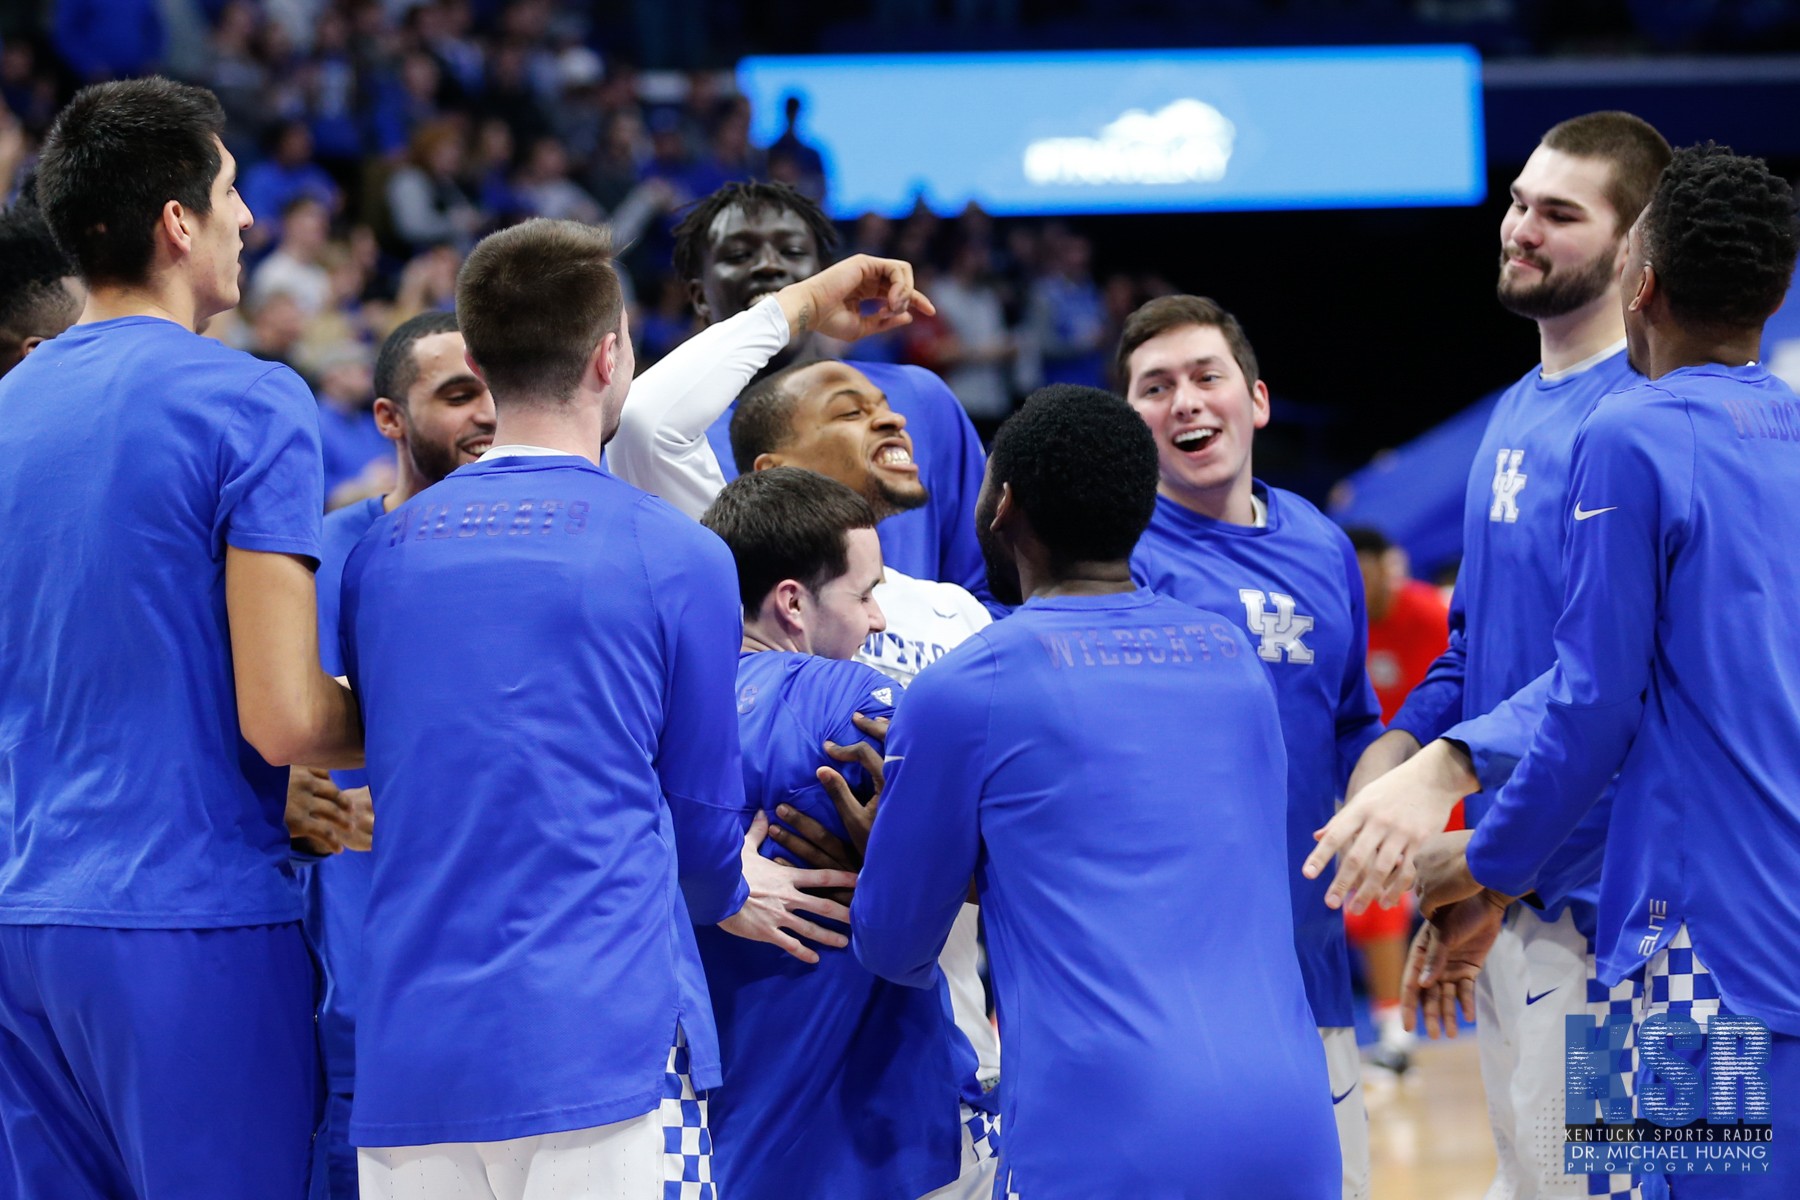 Kentucky is runner up in the Academic Performance Tournament